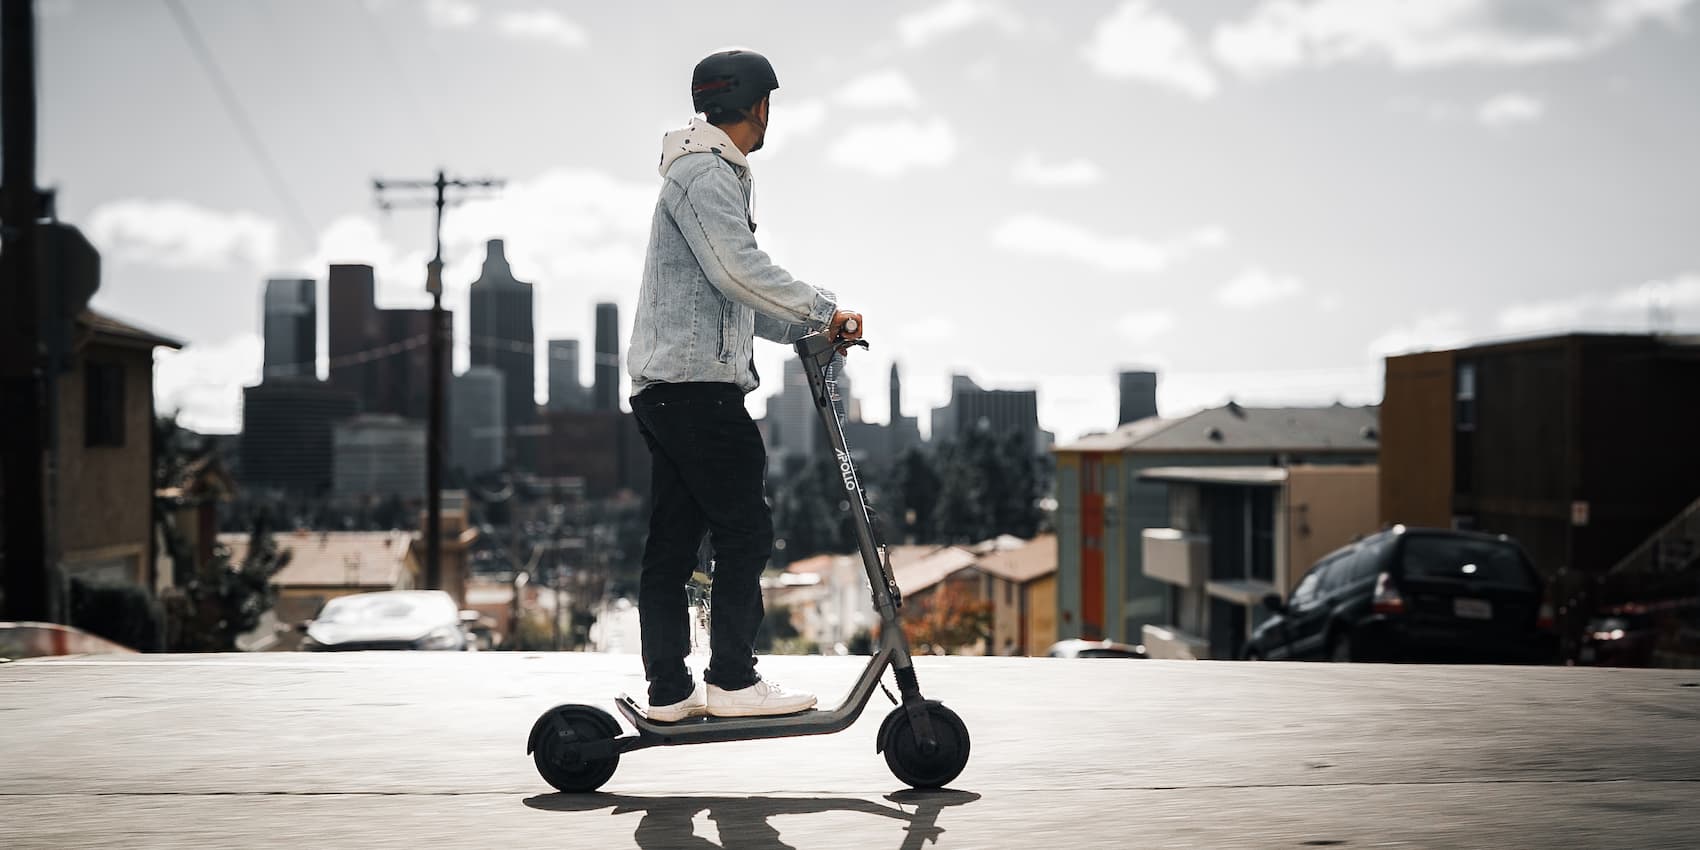 Infinite Machine P1 Electric Scooter: Specs, Release Date, Features